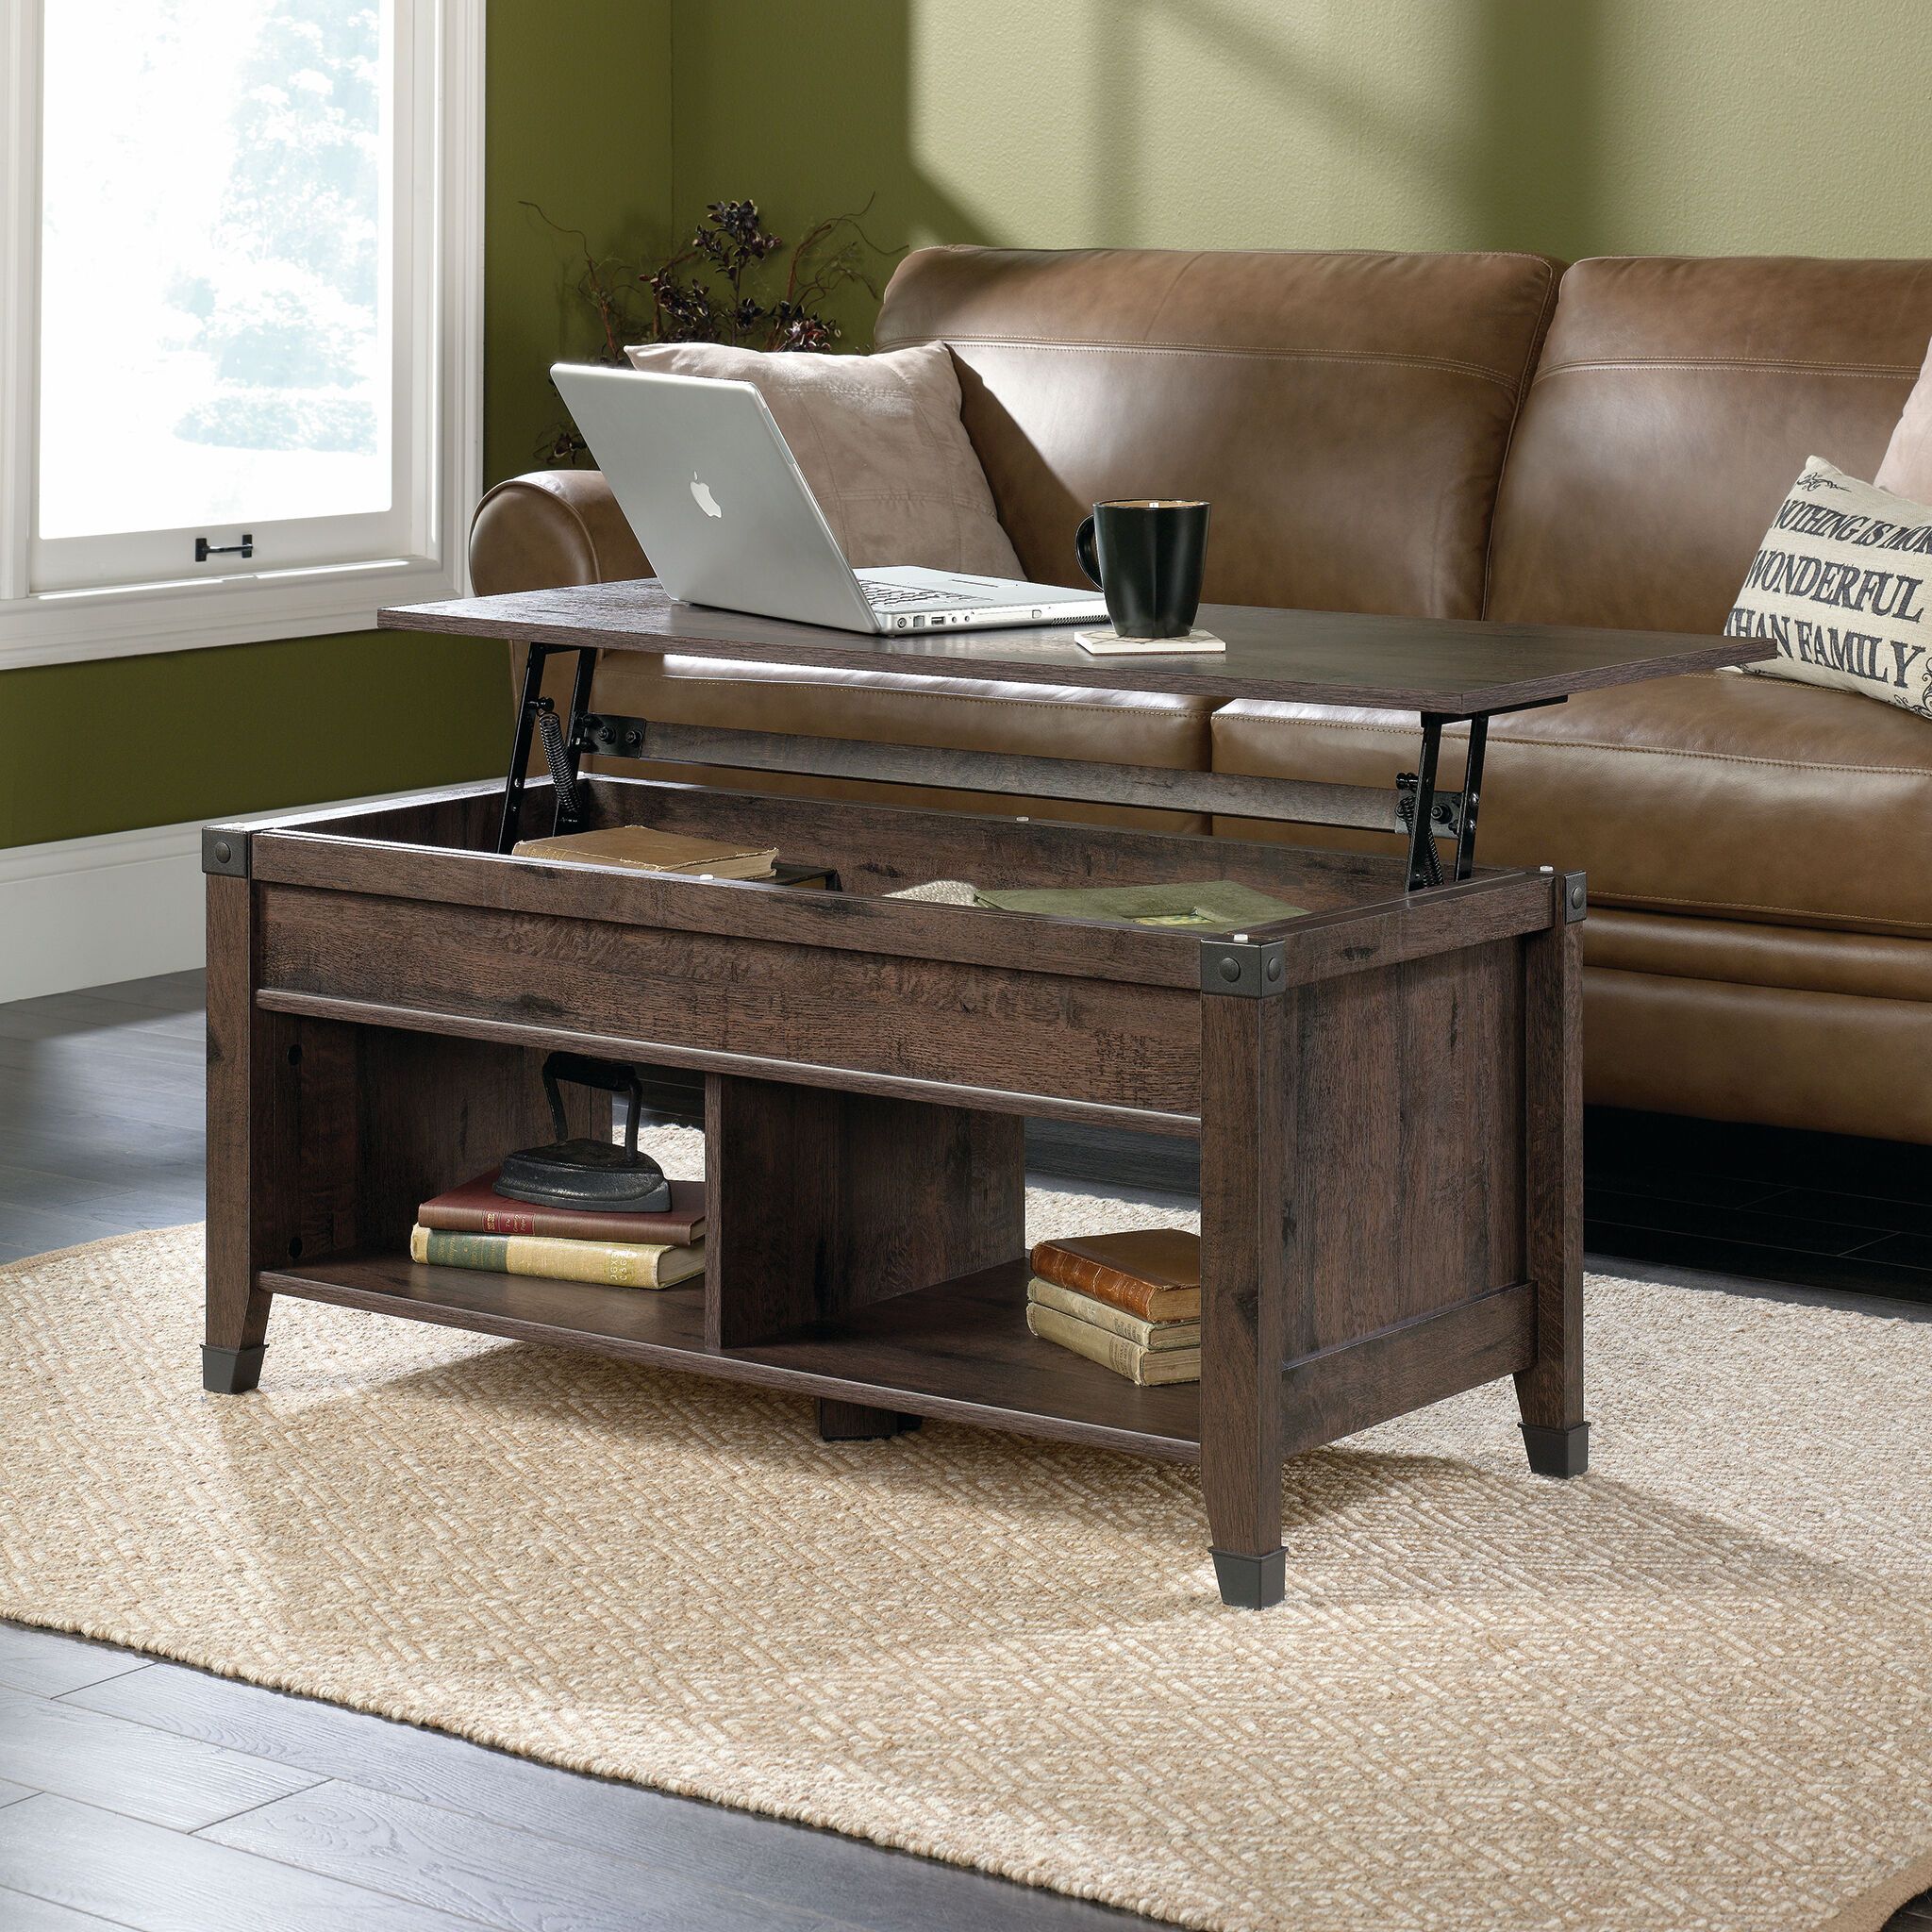 Rectangular Lift Top Contemporary Coffee Table In Coffee Oak | Mathis Intended For Lift Top Coffee Tables (View 6 of 15)